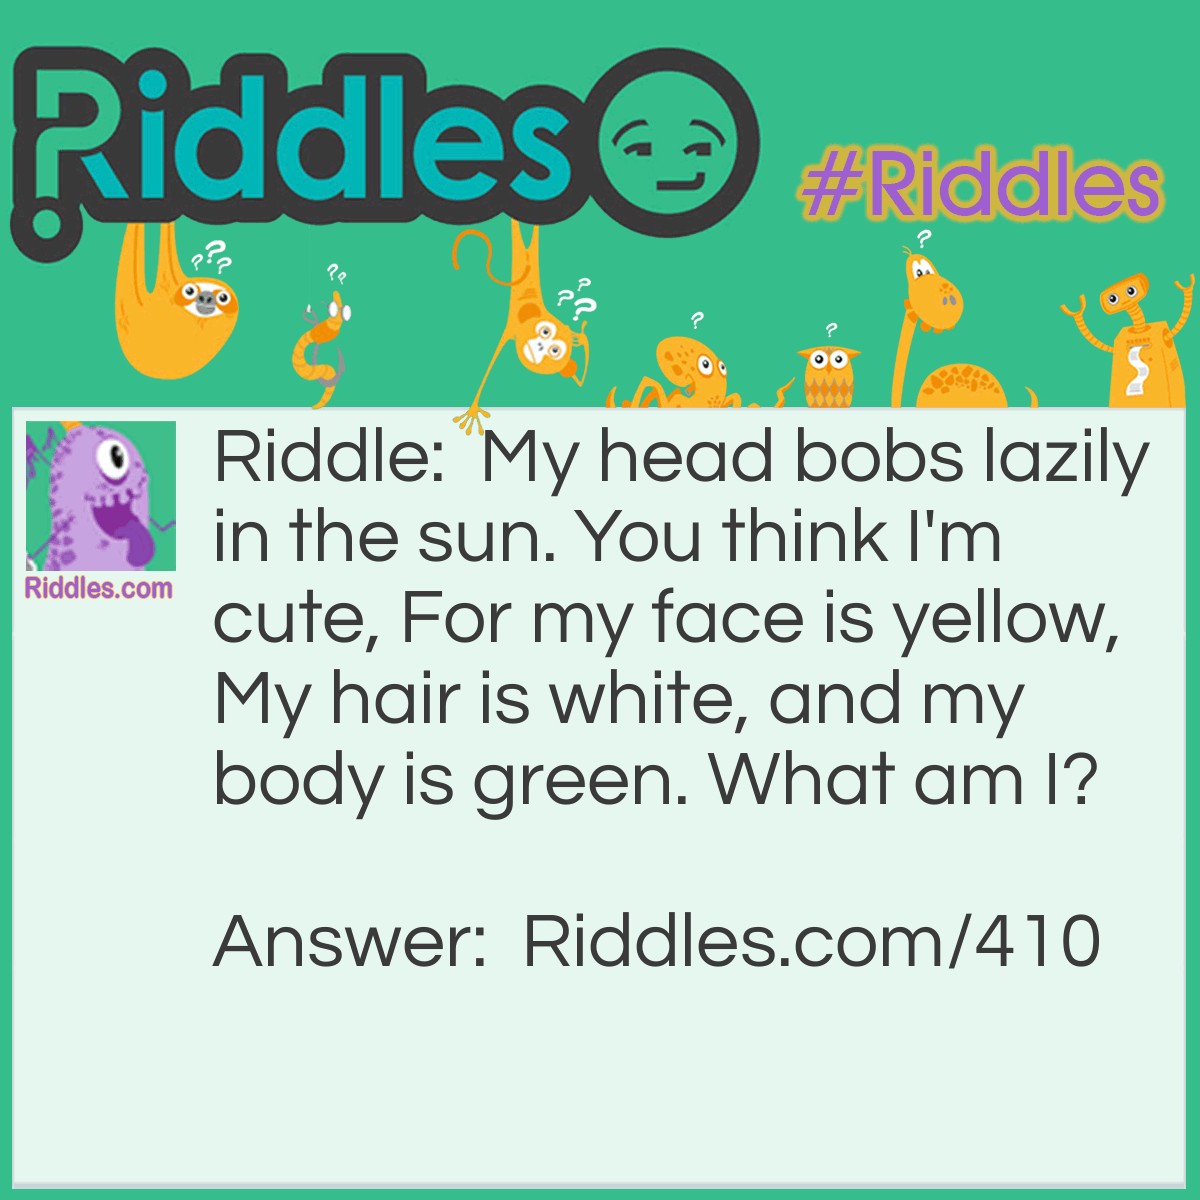 Riddle: My head bobs lazily in the sun. You think I'm cute, For my face is yellow, My hair is white, and my body is green. What am I? Answer: A daisy.